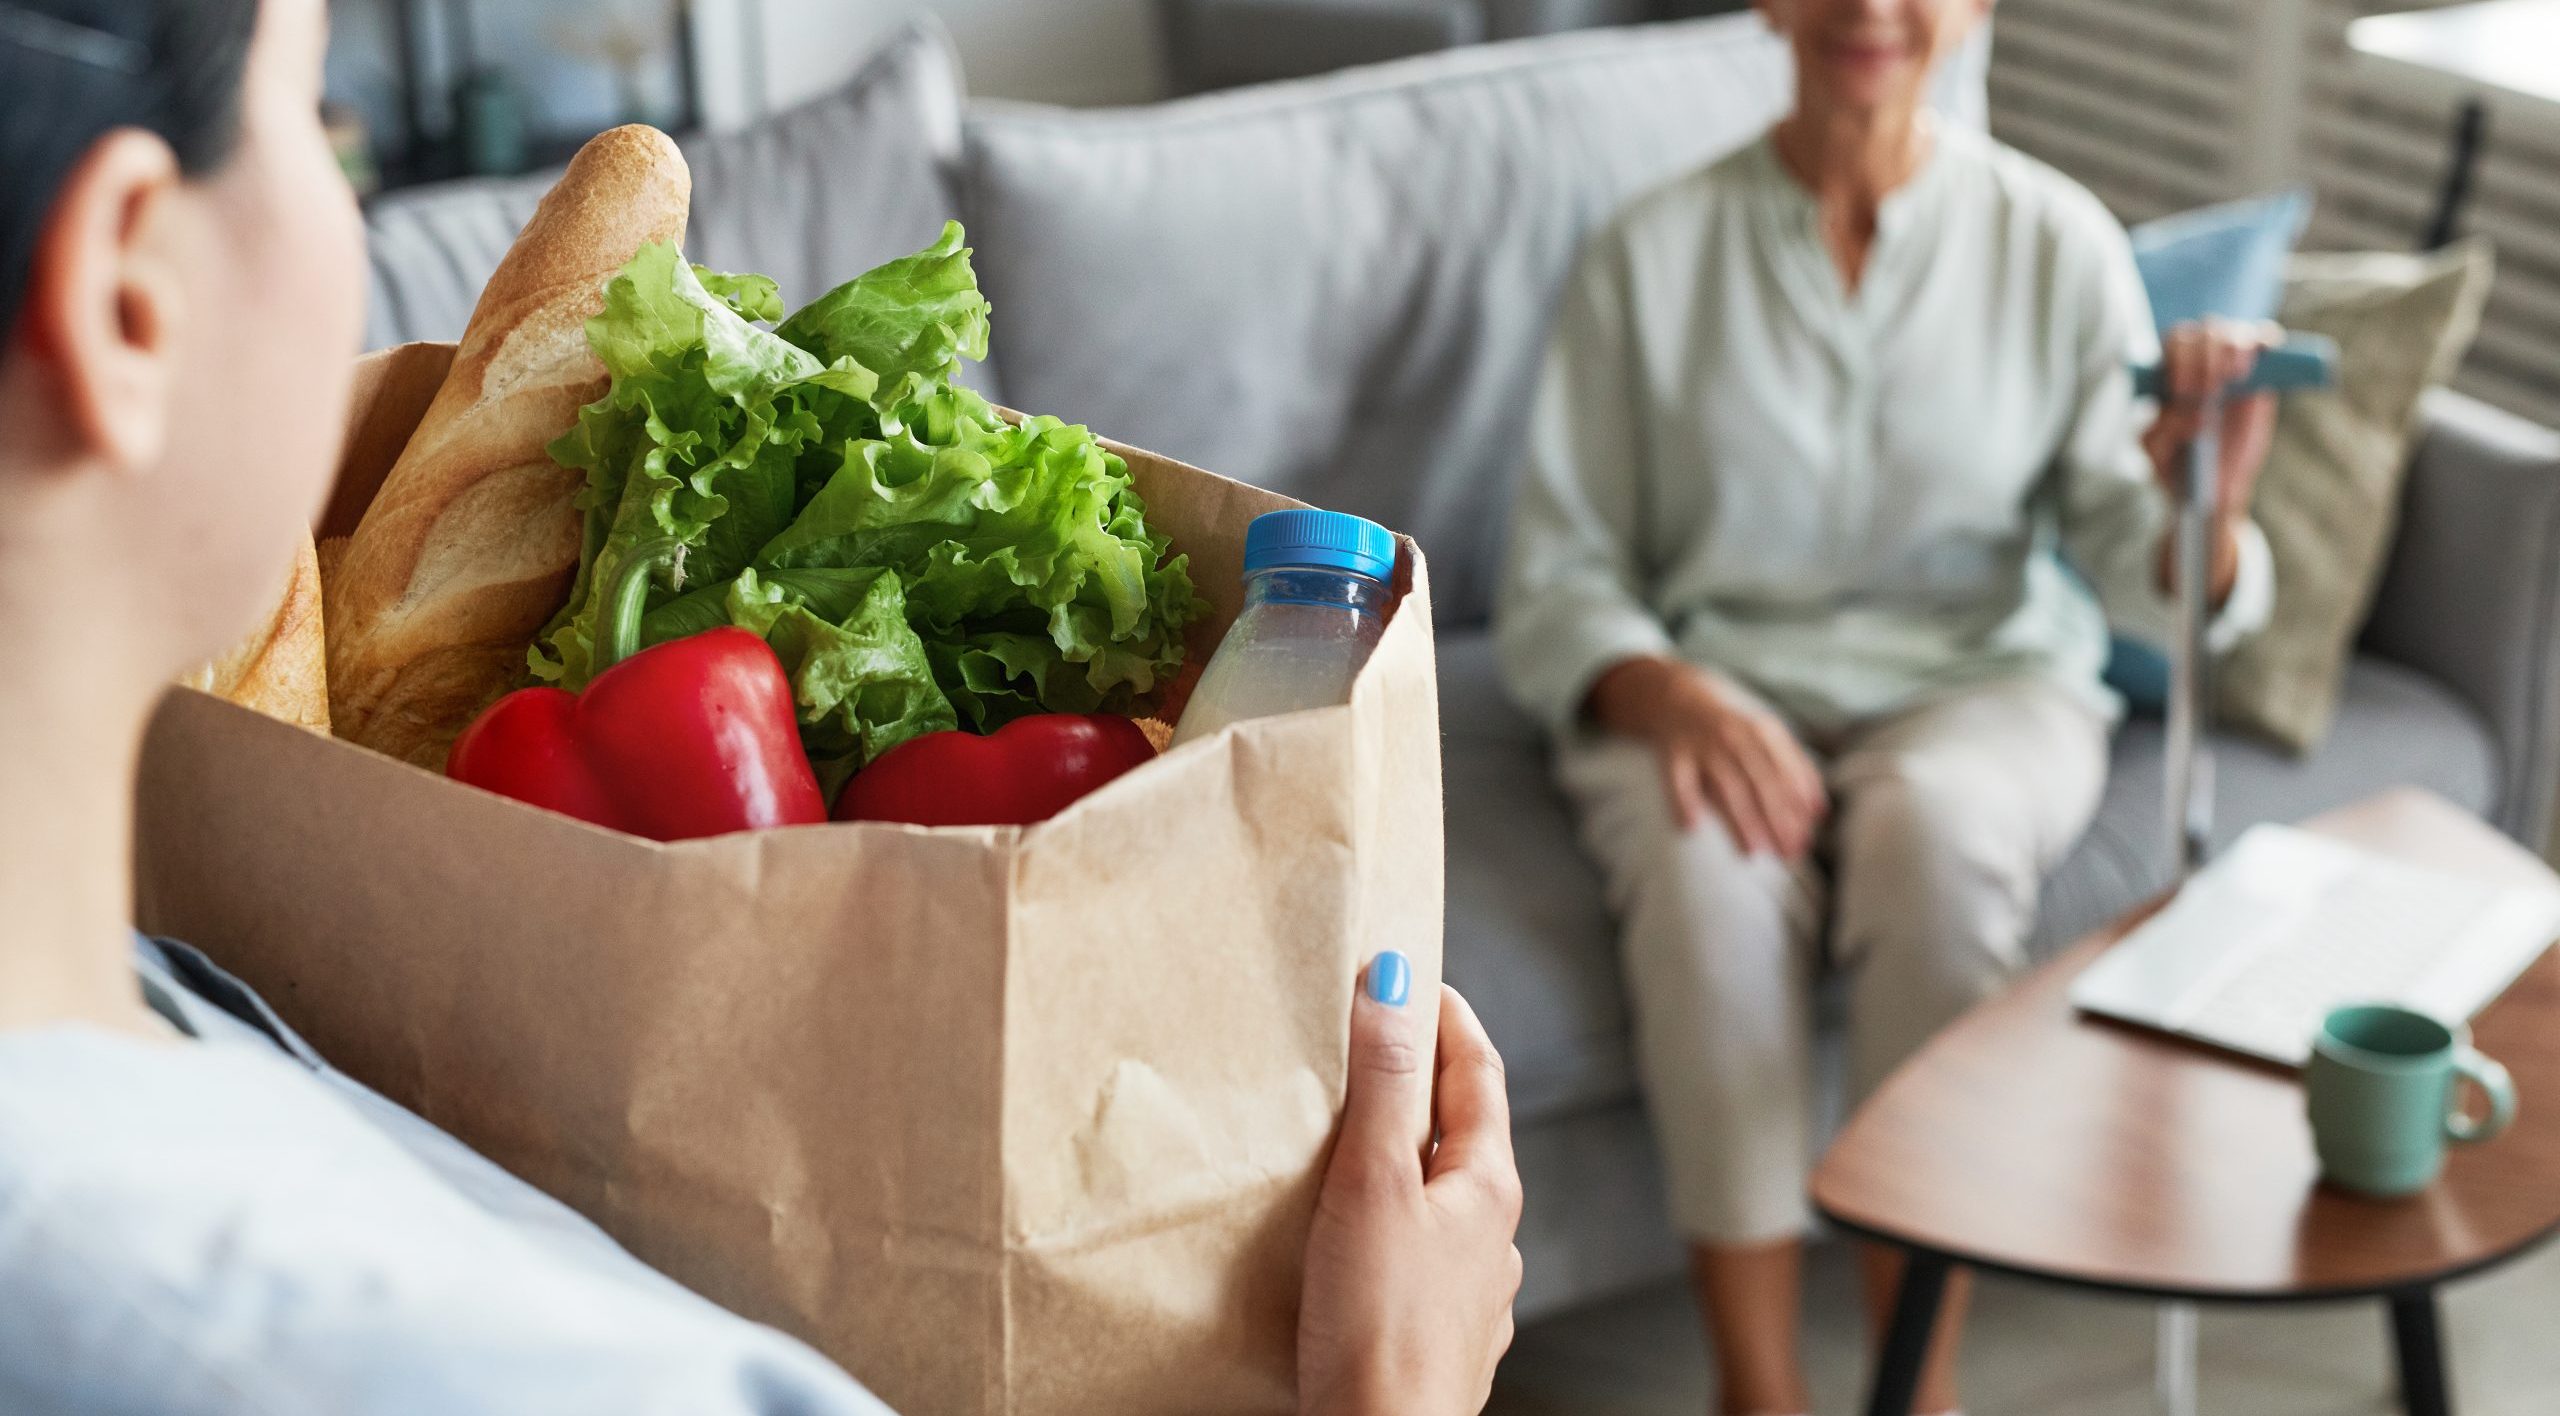 Carers can shop and deliver groceries and medicines on behalf of their clients, in order to increase revenue and customer satisfaction.